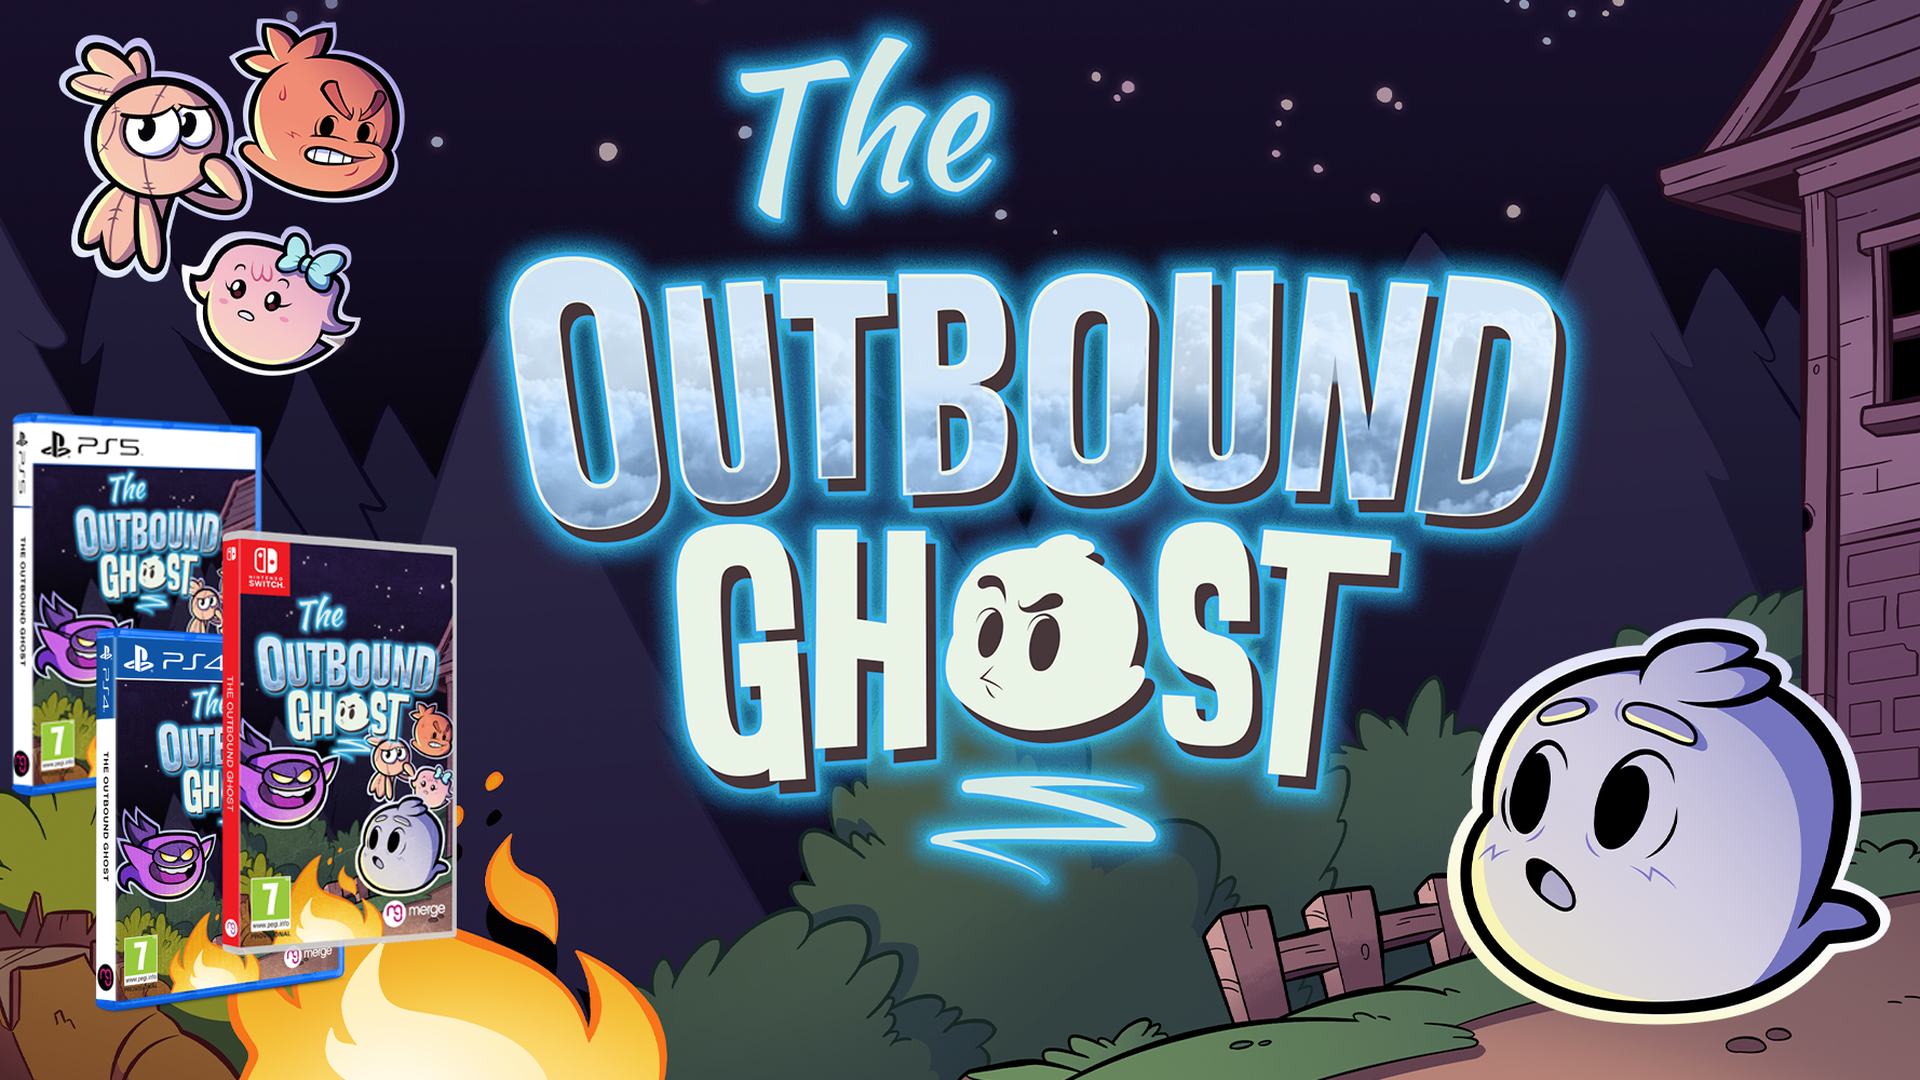 Update on The Outbound Ghost physical versions